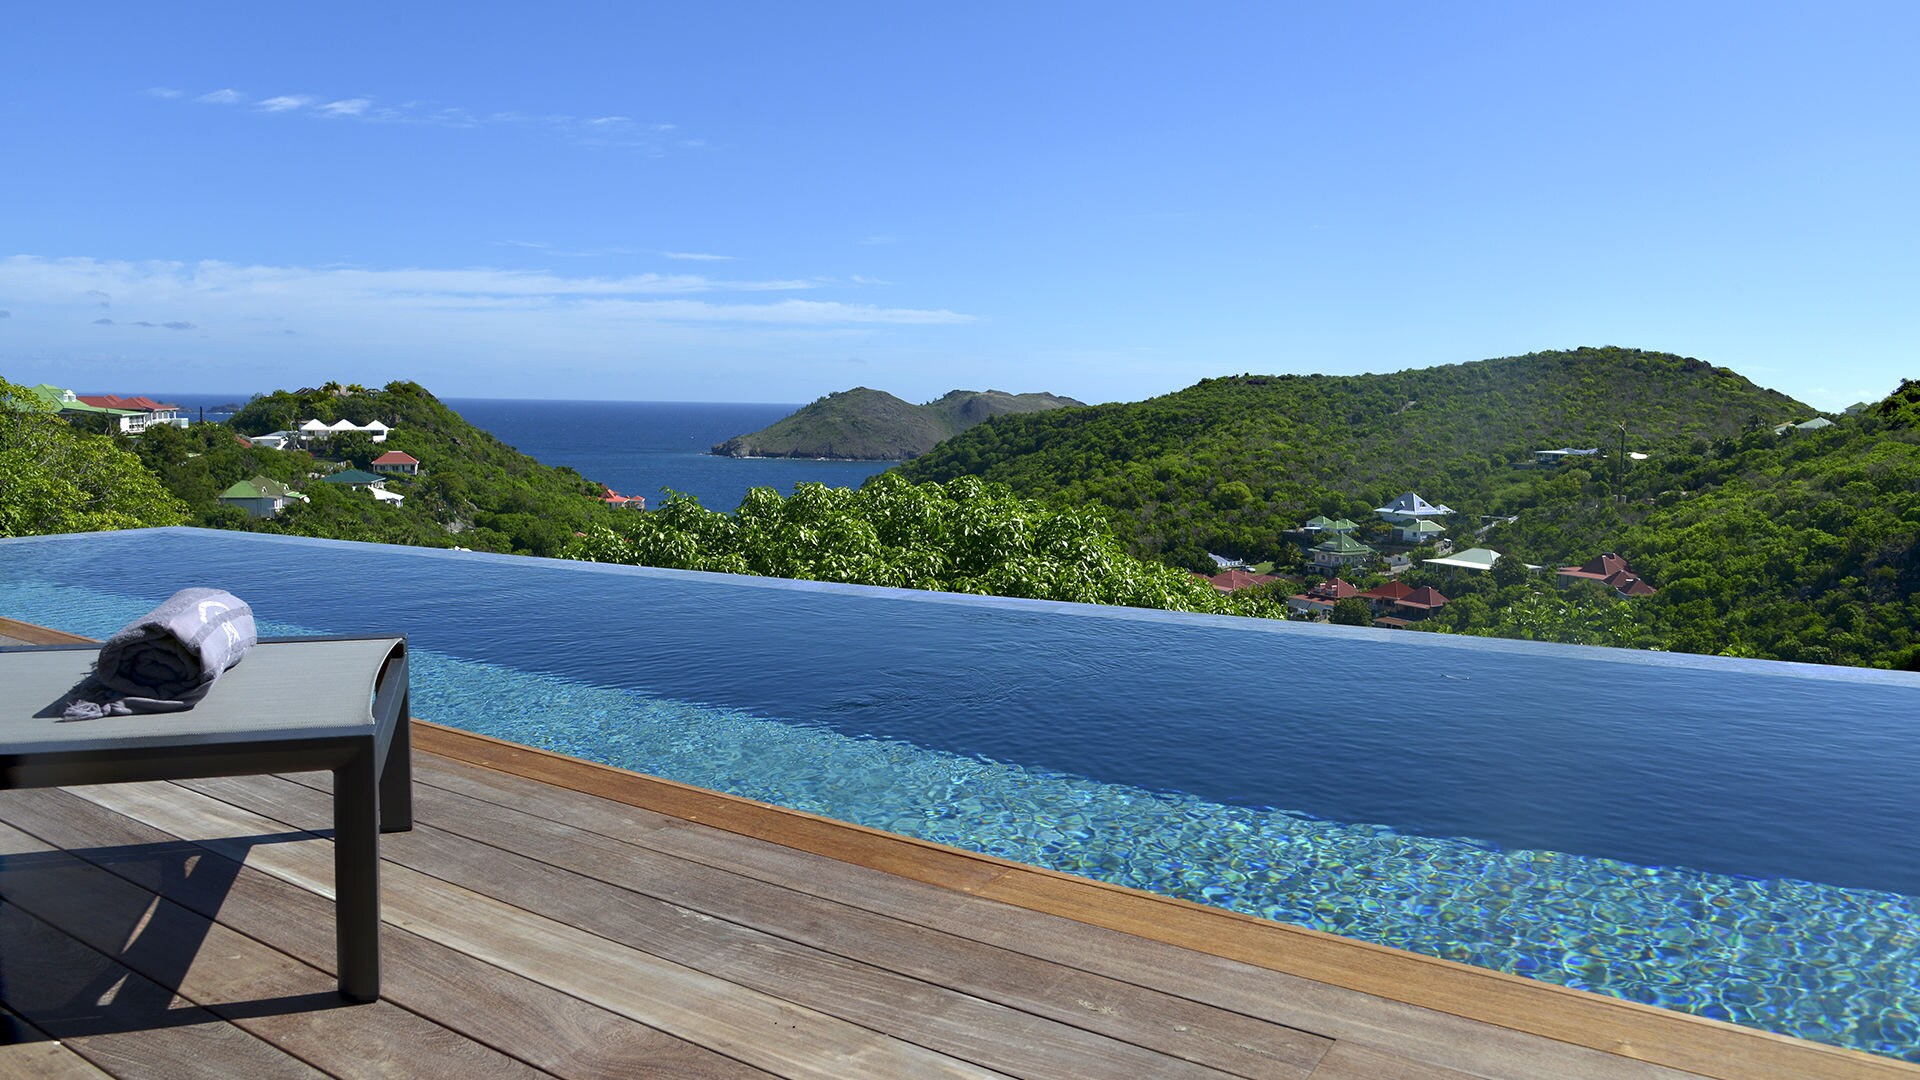 Infinity&nbsp;pool, deckchairs, gas barbecue, table for four people, covered parking. Panoramic view of the sunsets.